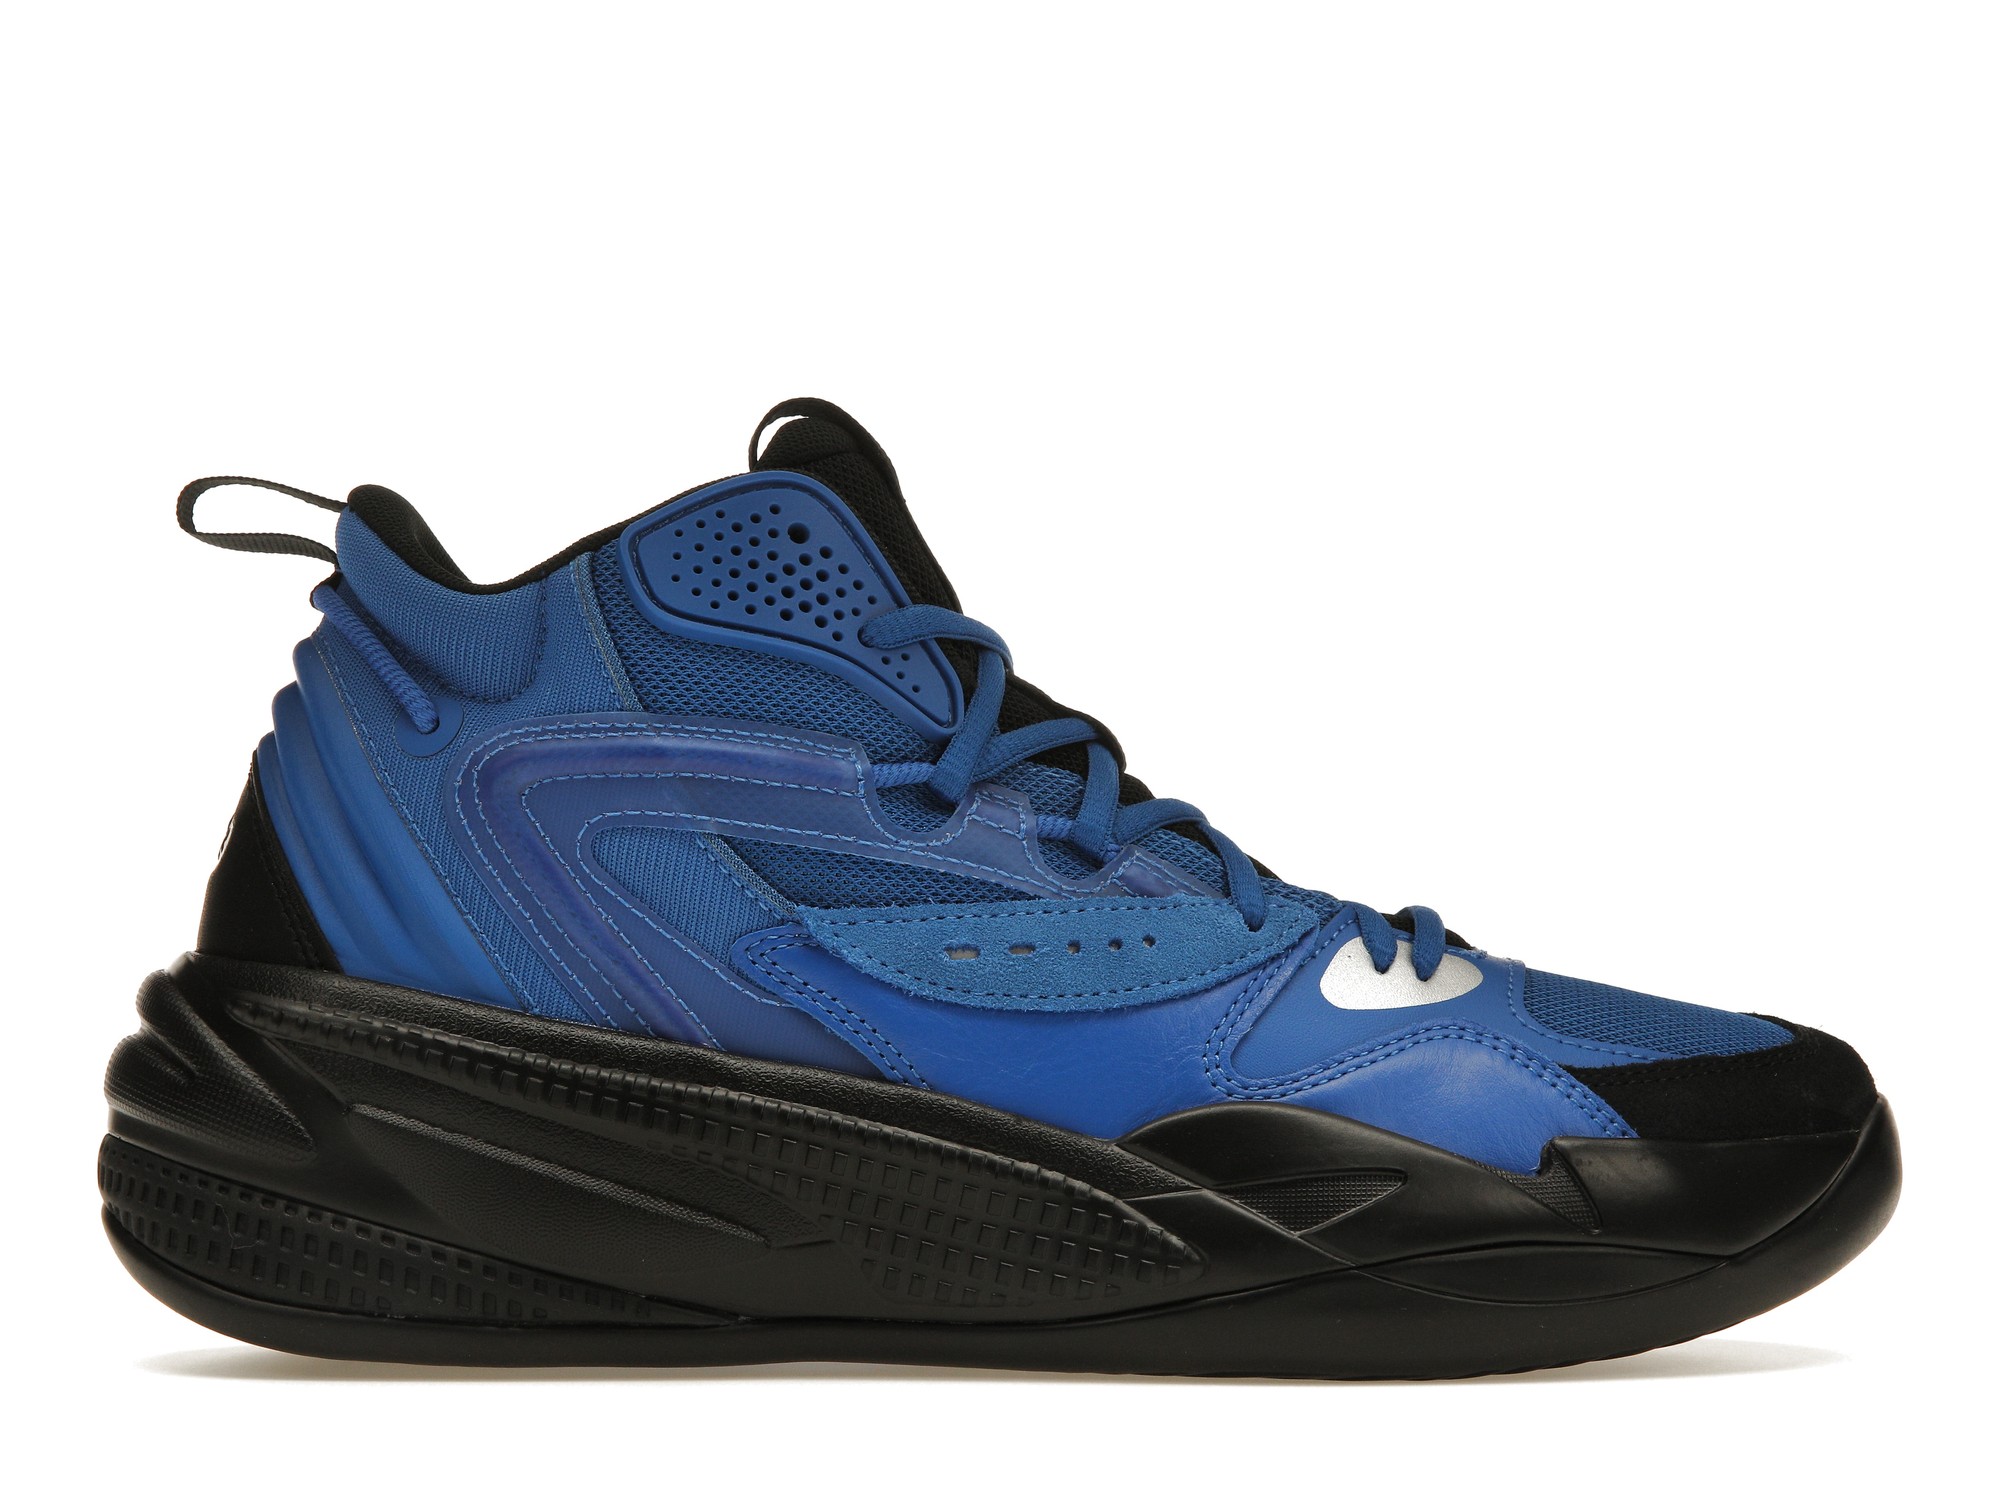 PUMA Launches J. Cole's First Basketball Shoe, the RS-Dreamer